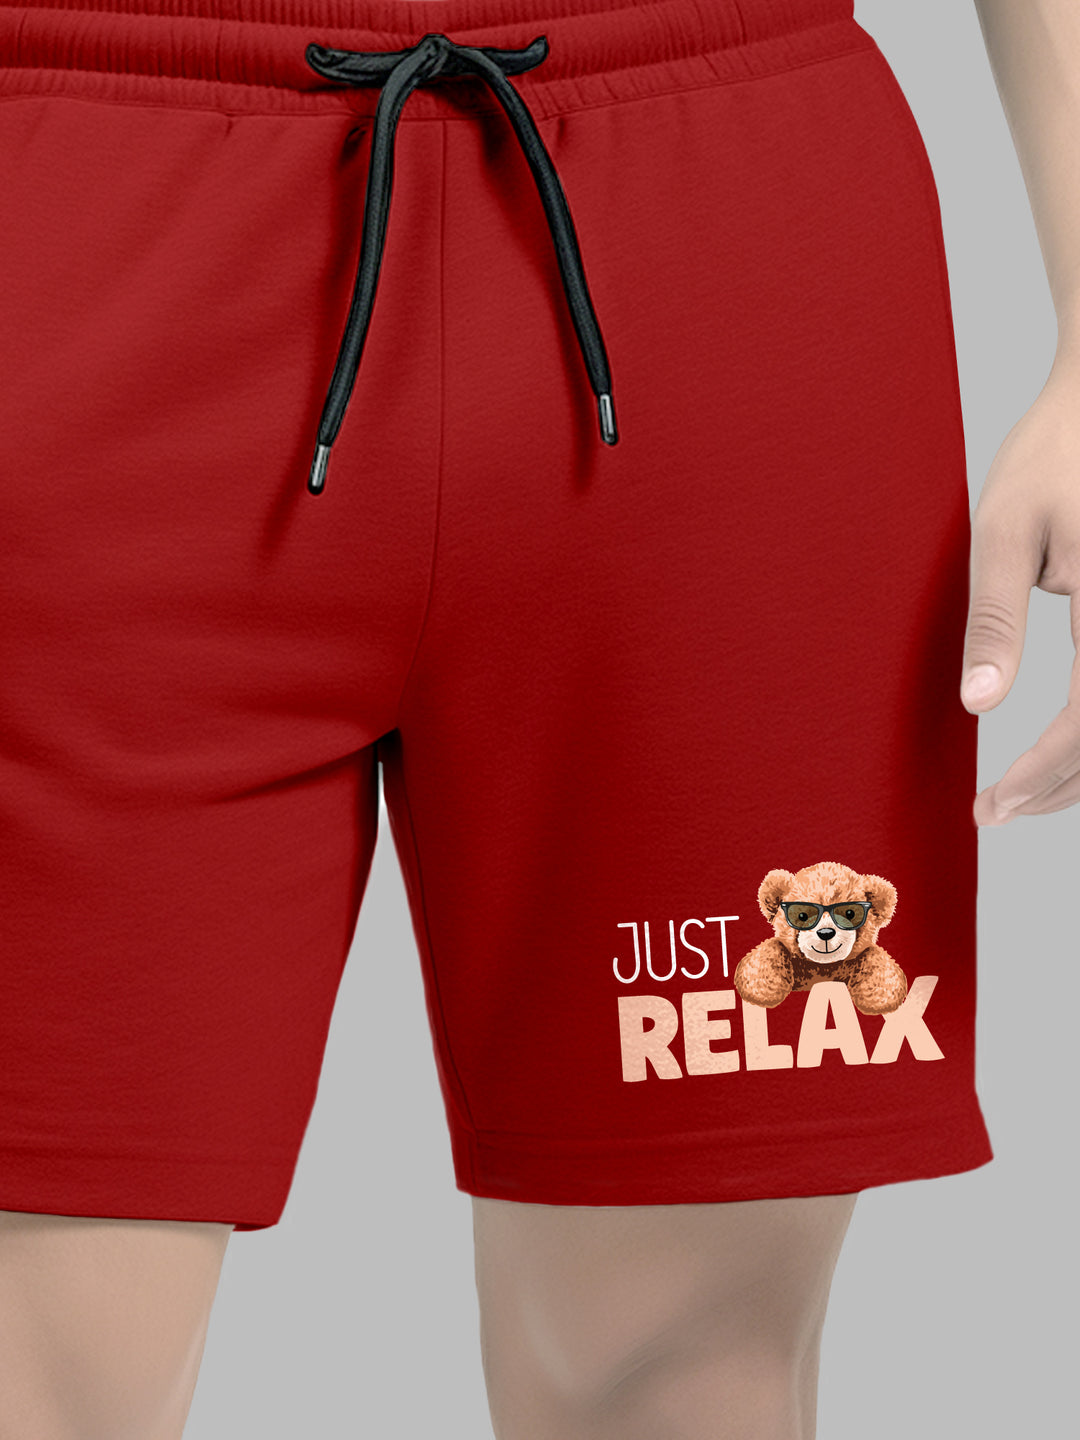 Just Relax Cotton Mens T Shirt and Short Set